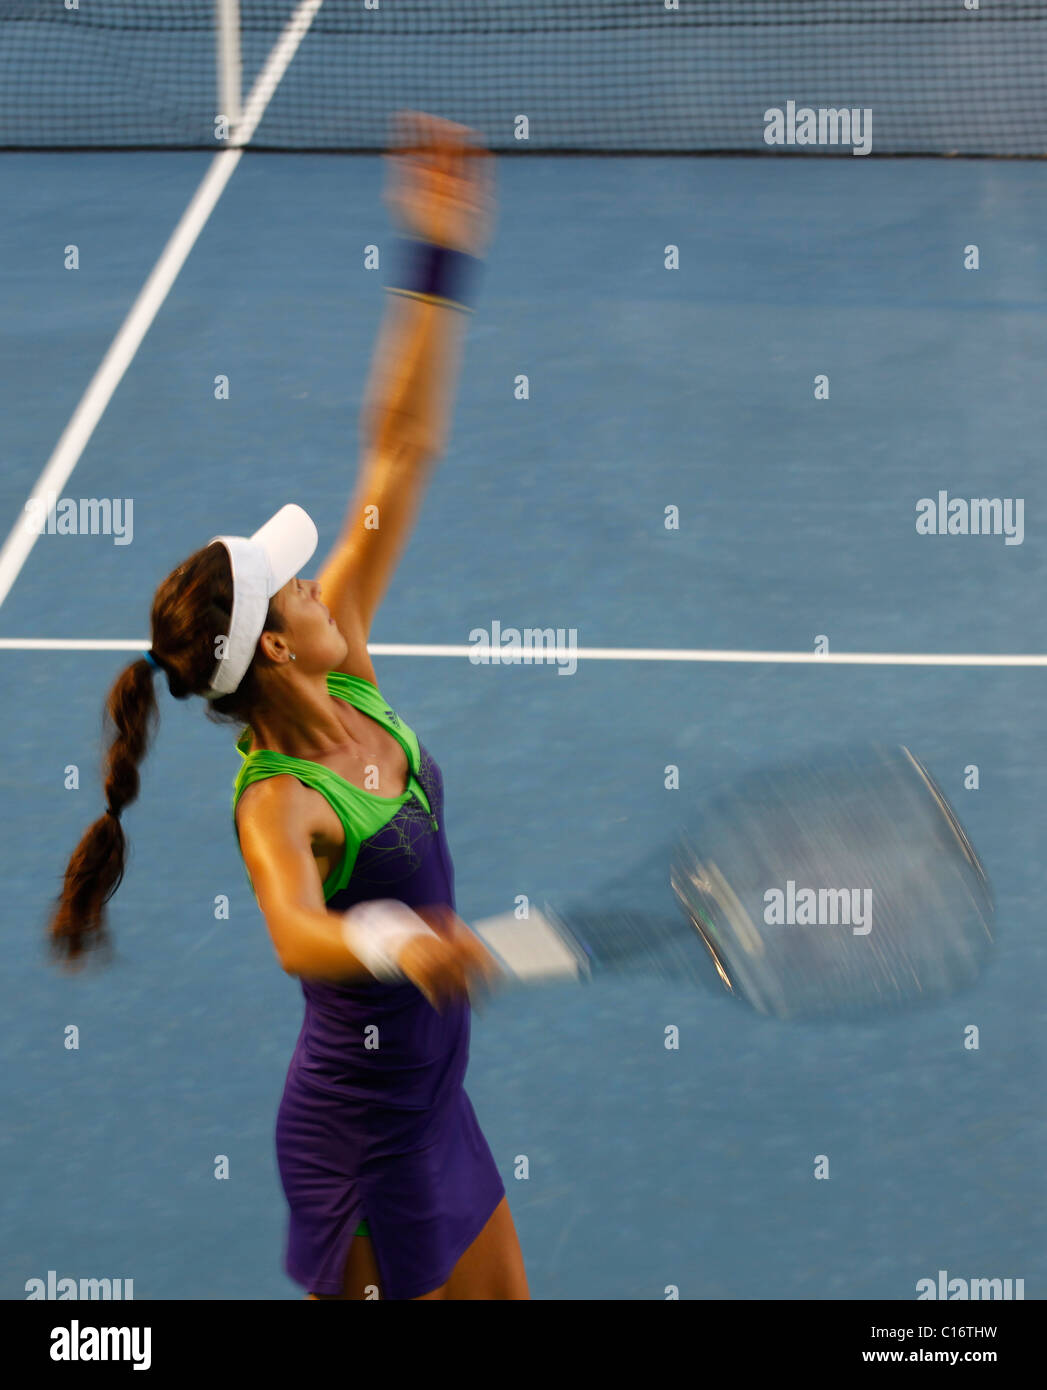 Tennis player Ana Ivanovic of Serbia in action Stock Photo